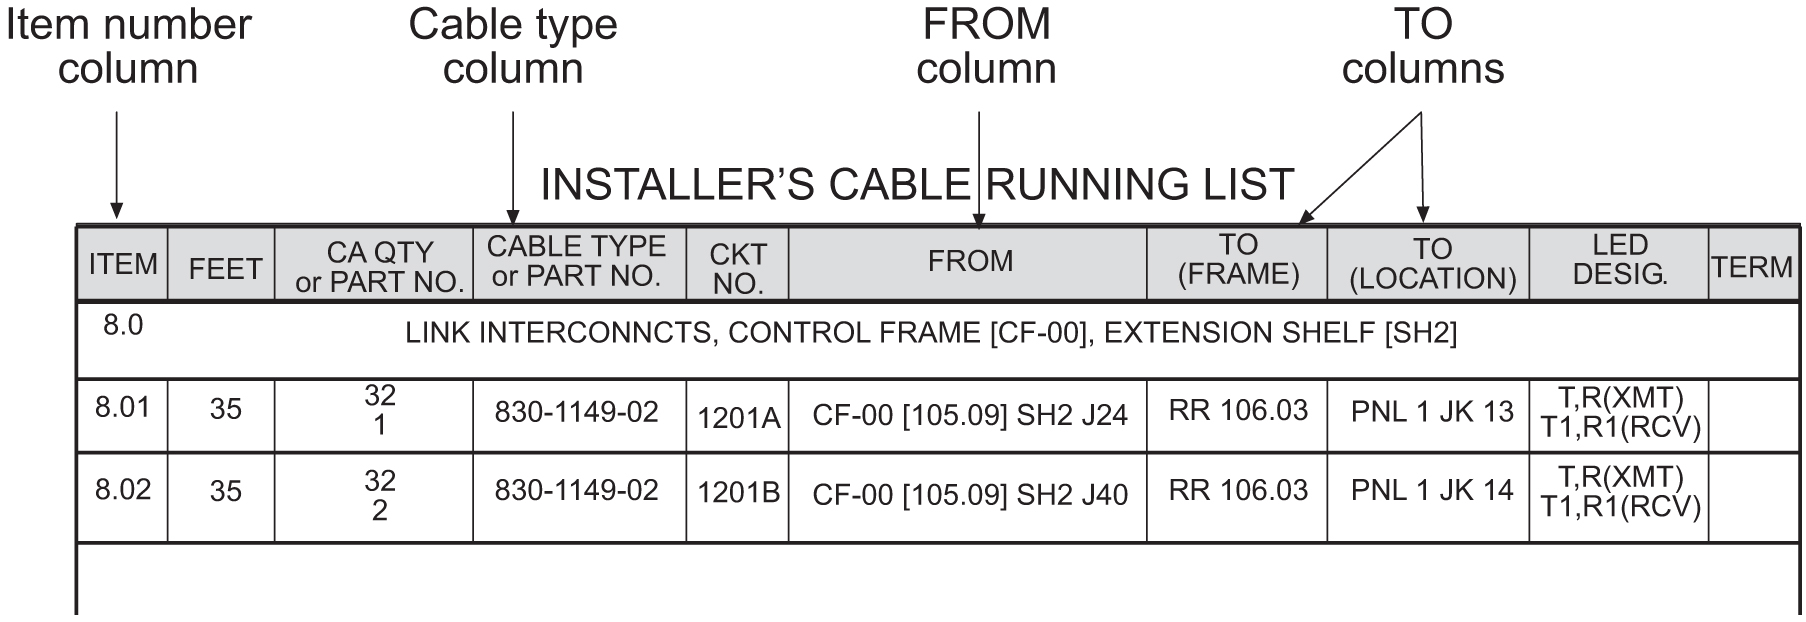 img/t_cable_labeling_im-fig1.jpg